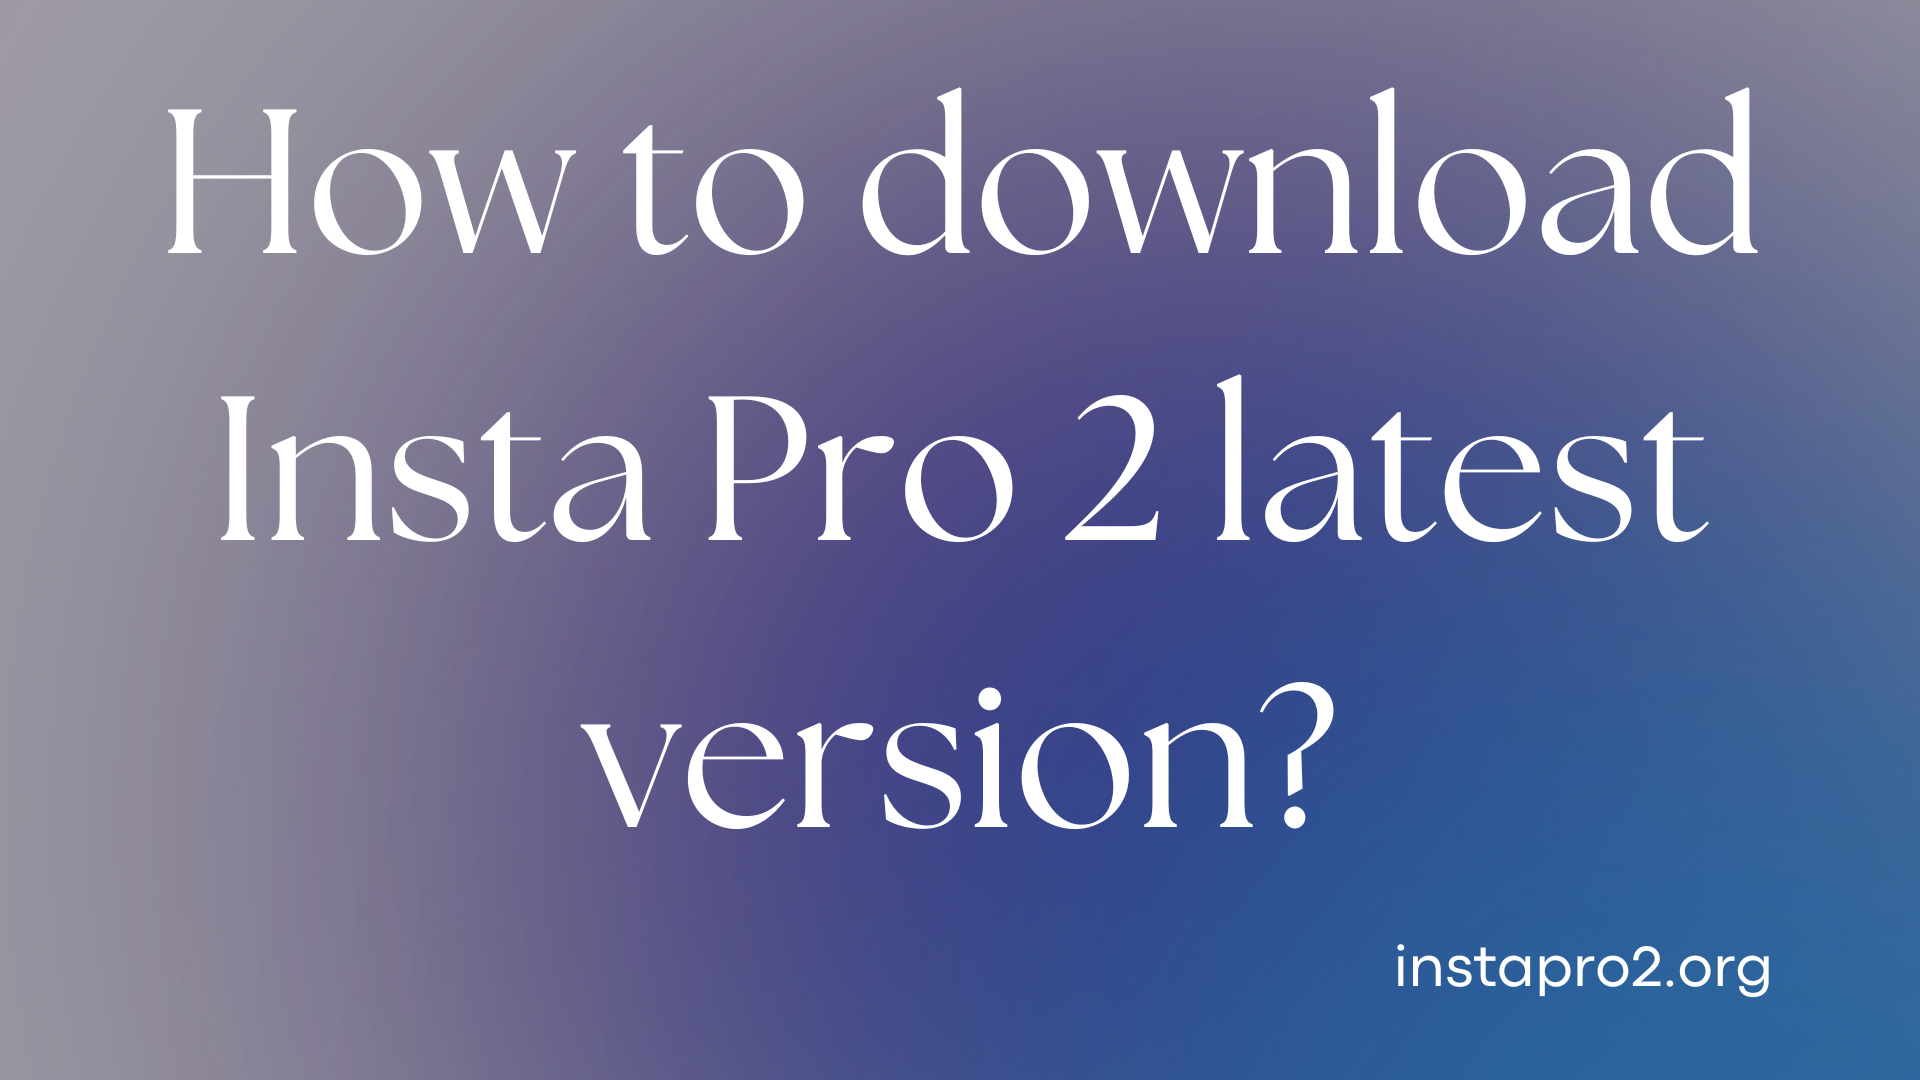 nsta Pro 2 allows users to download Instagram reels, posts, stories, and IGTV videos. It is a worldwide app that enables you to chat with your social media friends and family.